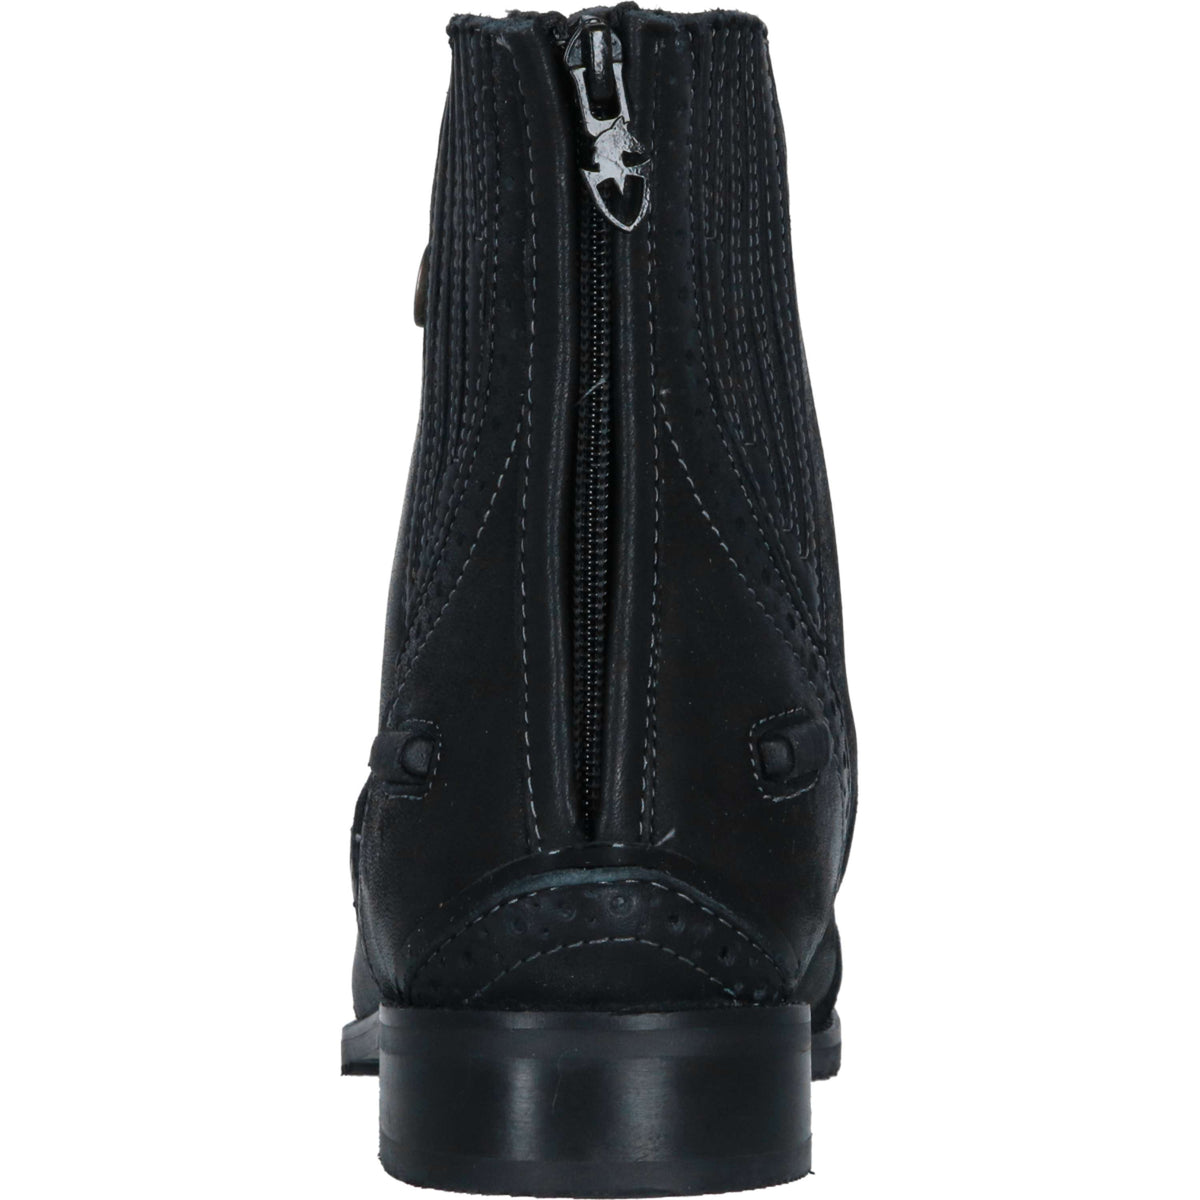 Moretta by Shires Paddock Boots Camillla Schwarz